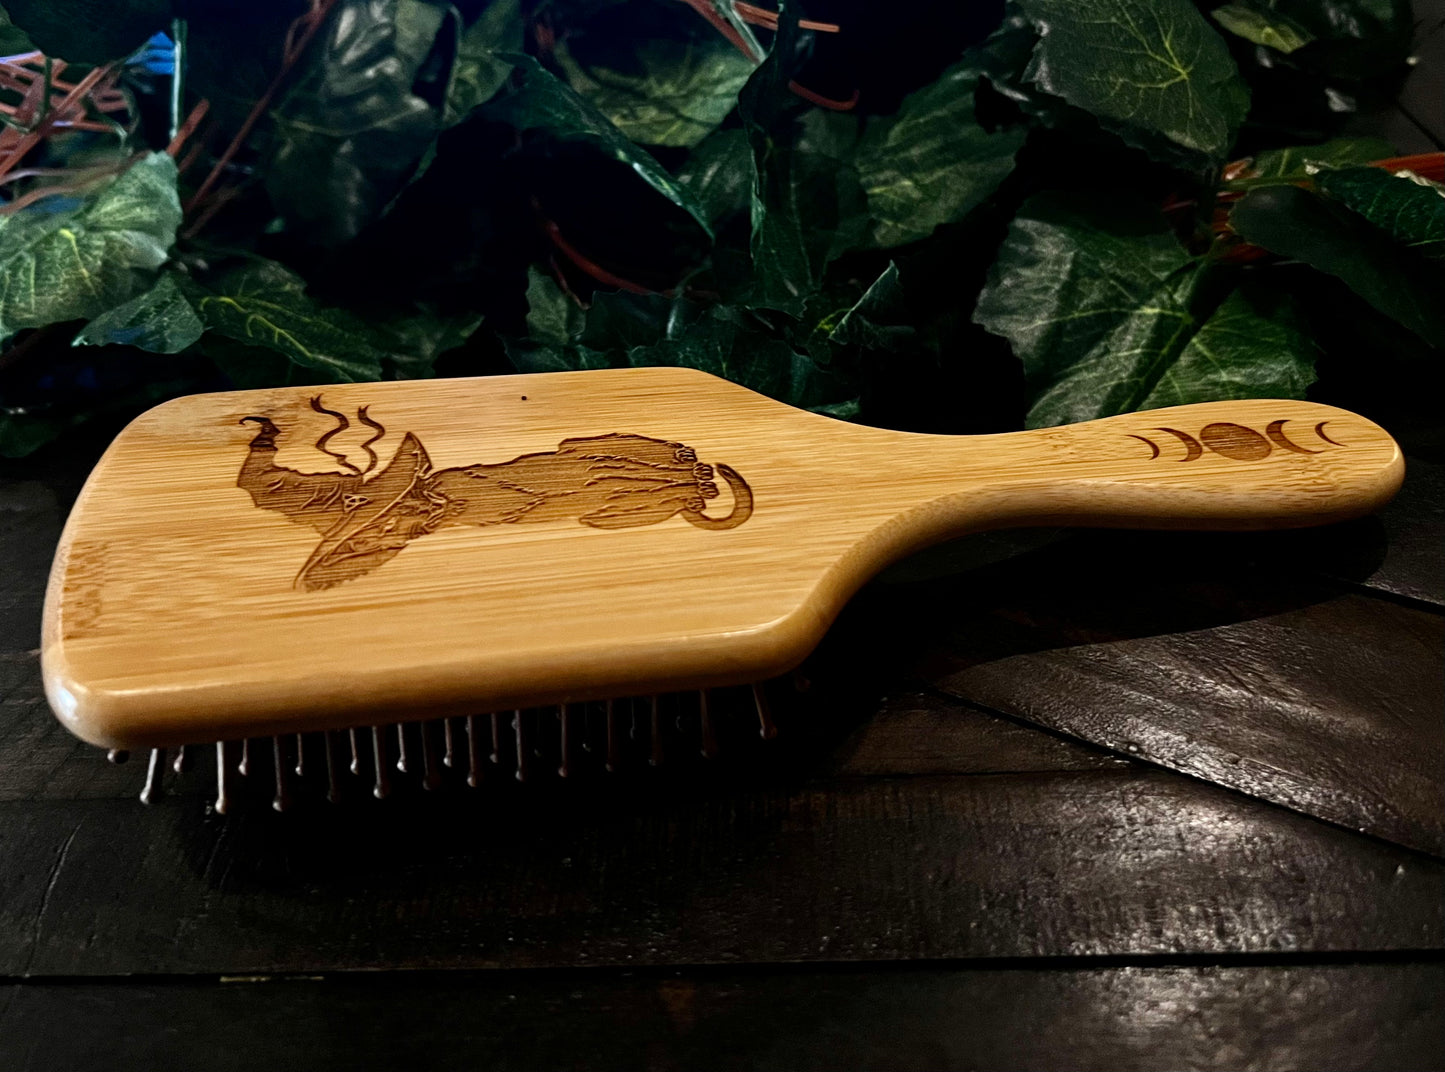 Hairbrush - Cat in Witches Hat Engraved on Bamboo